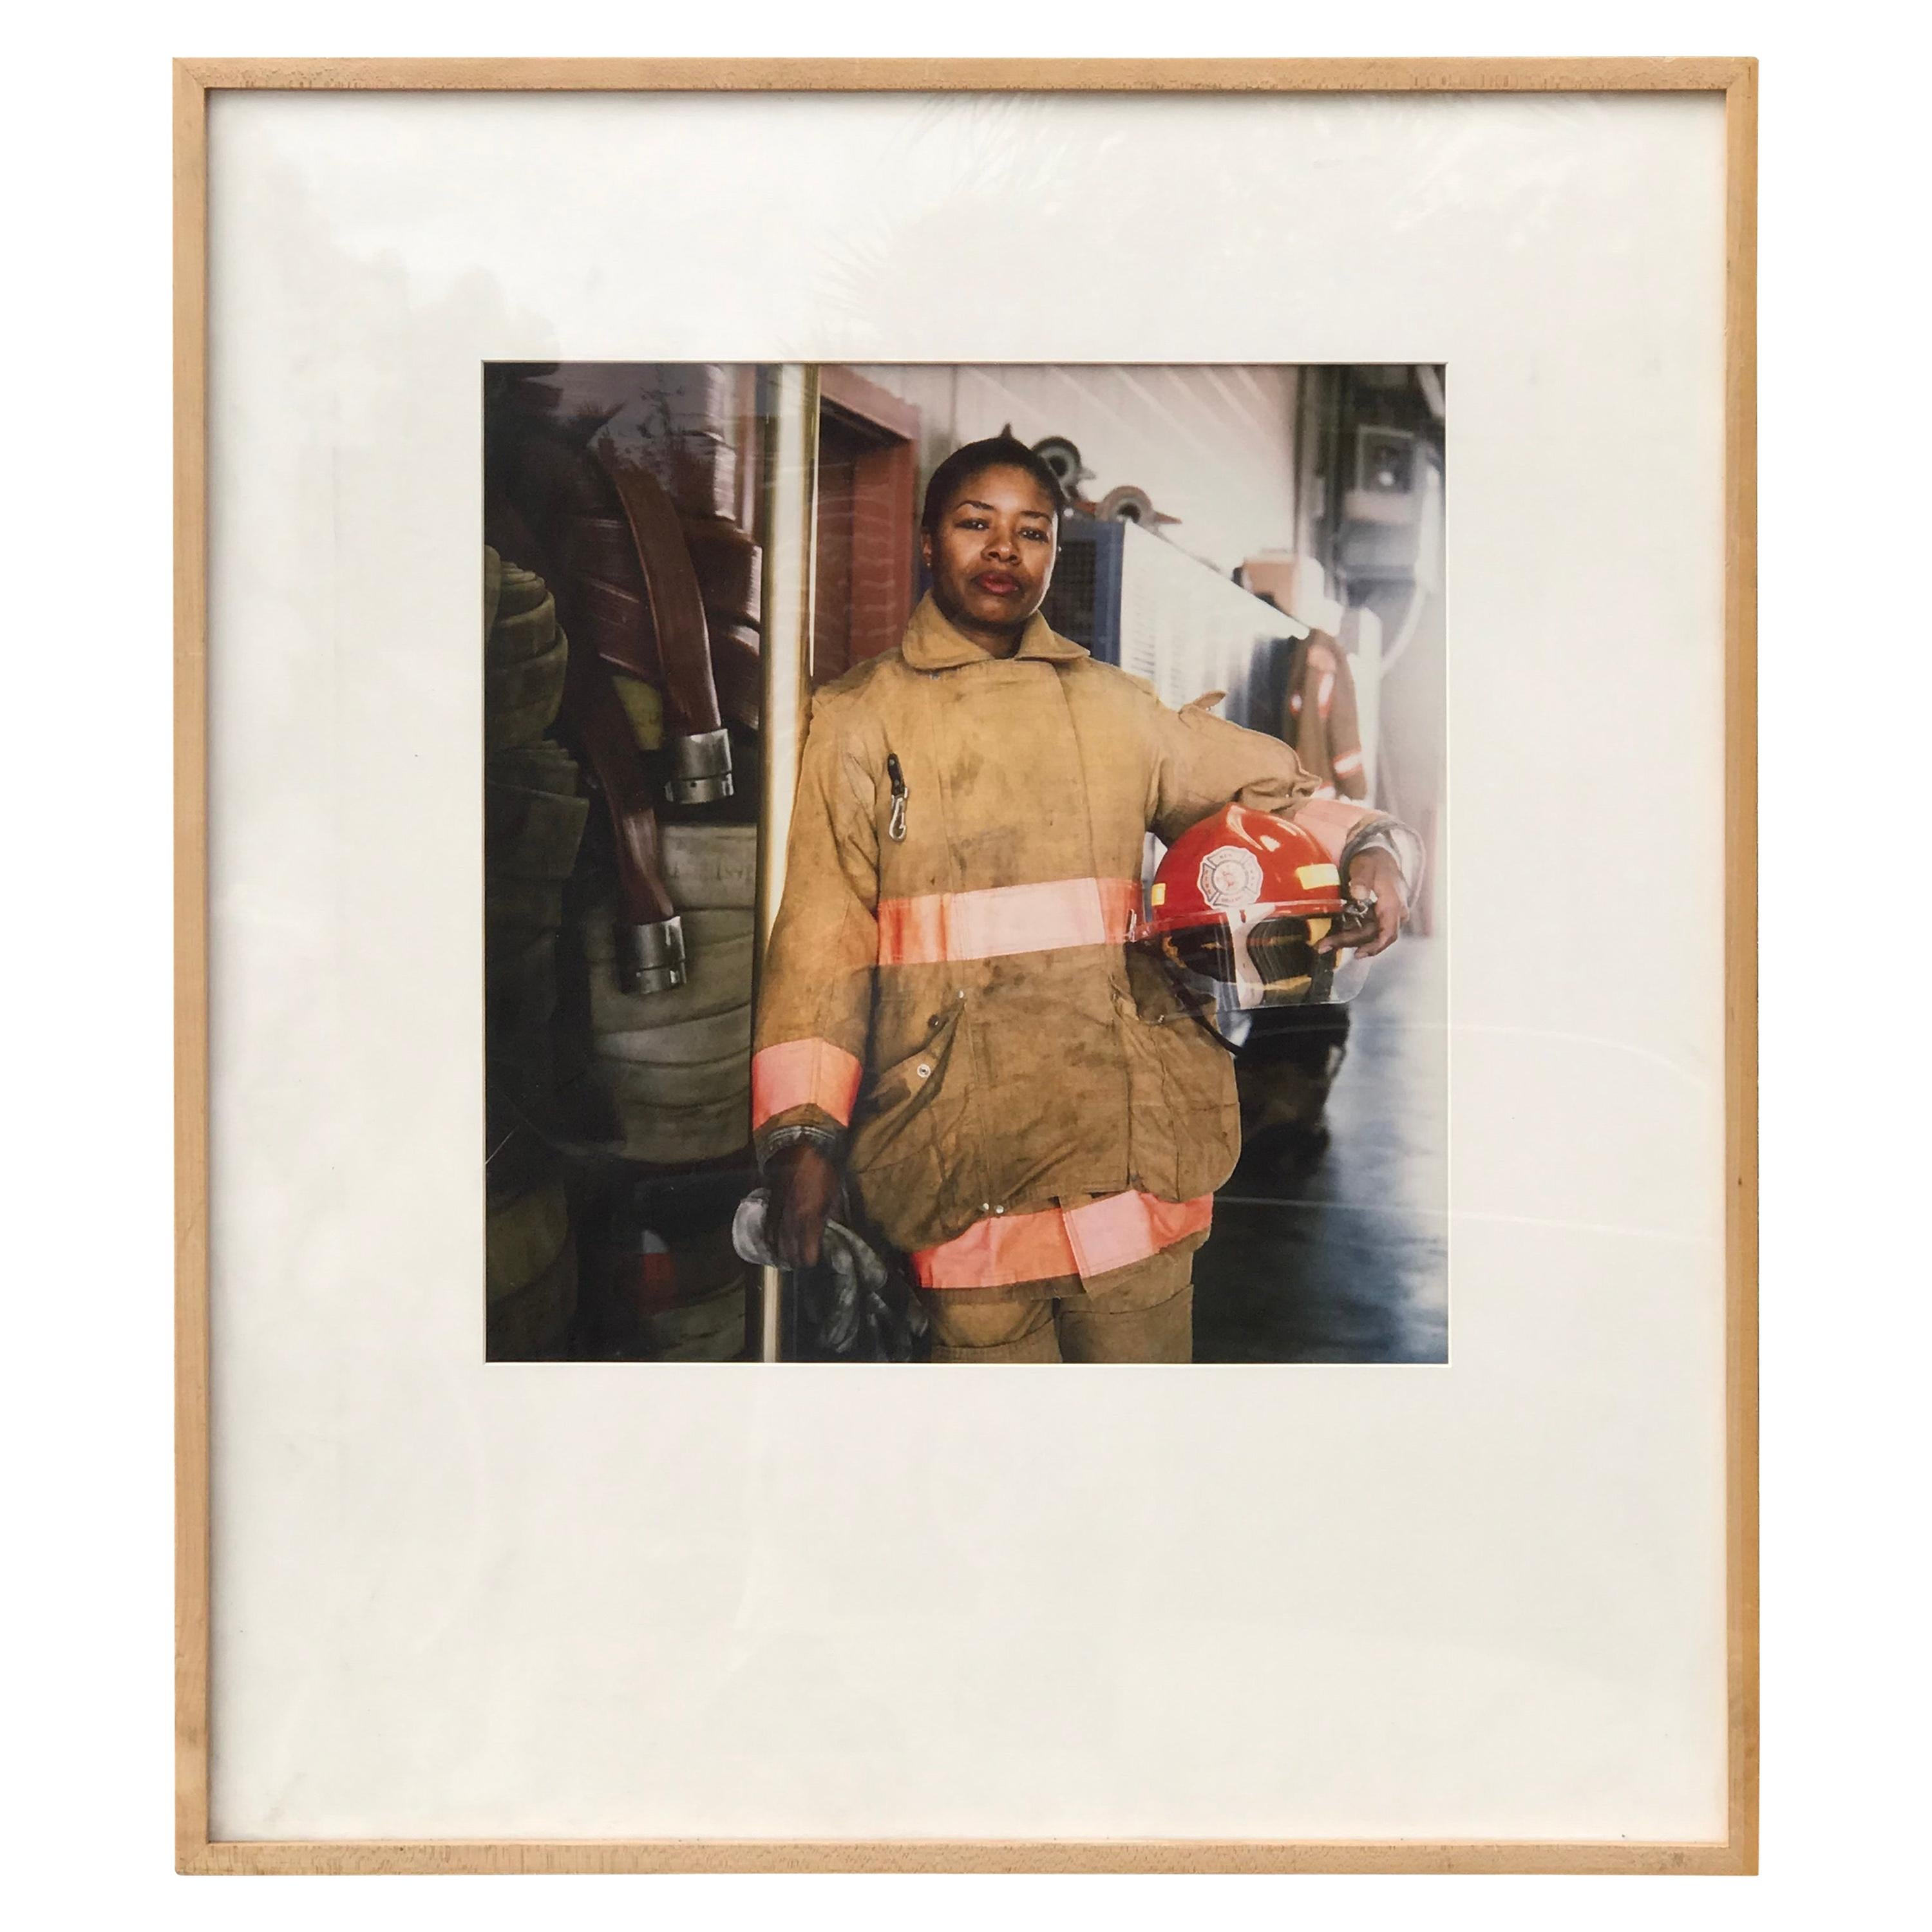 First Female Firefighter Kathy E. Morris by Photograph Jeffrey Henson Scales